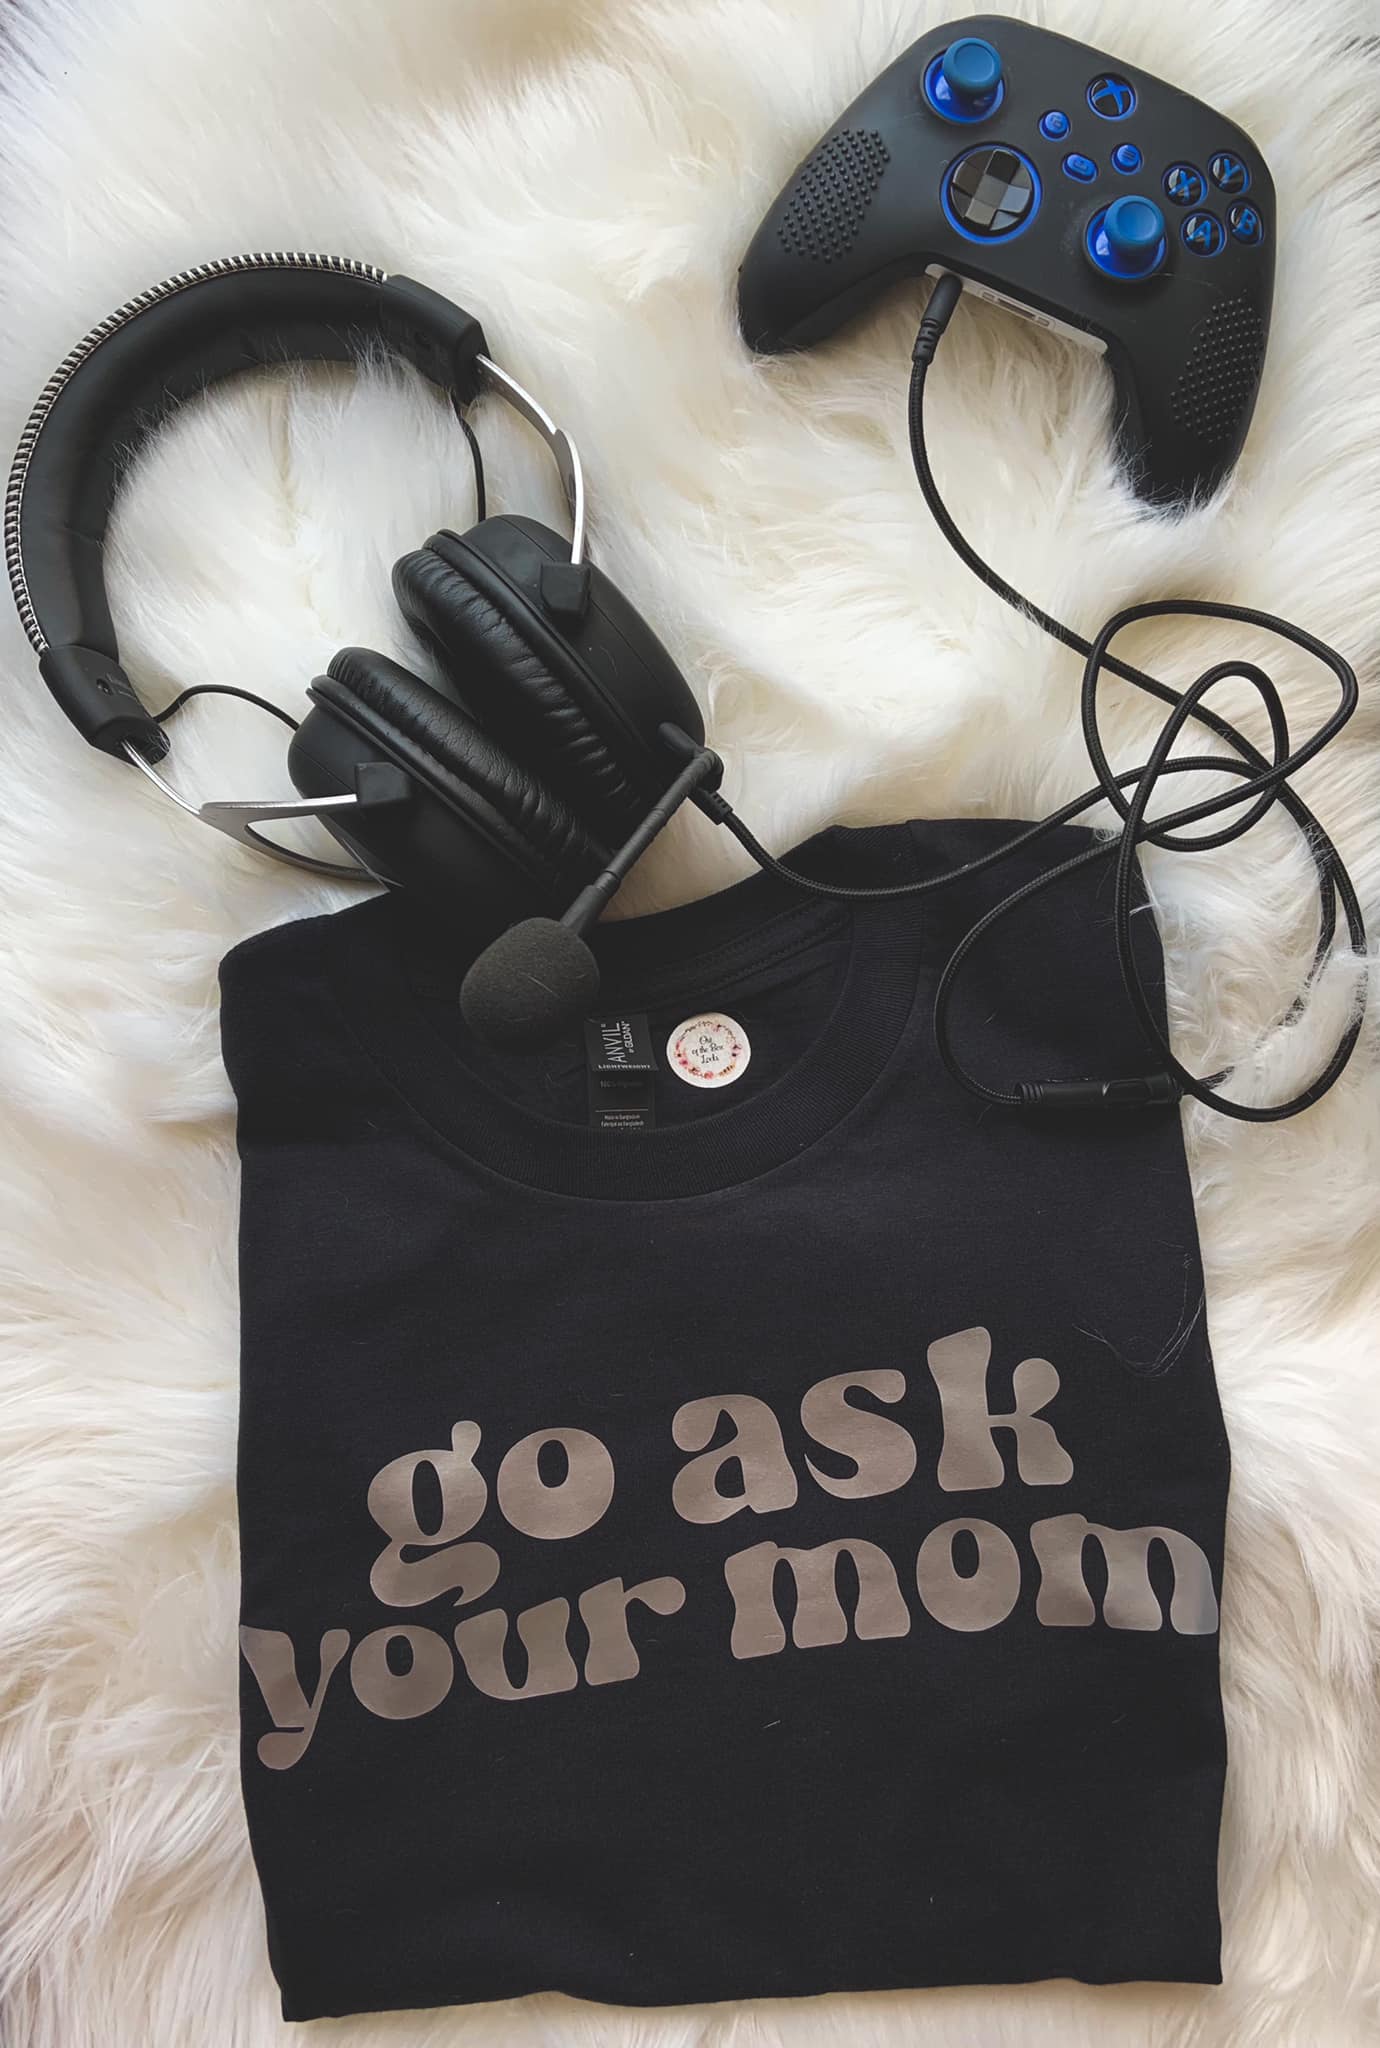 Go Ask Your Mom (Hoodie)